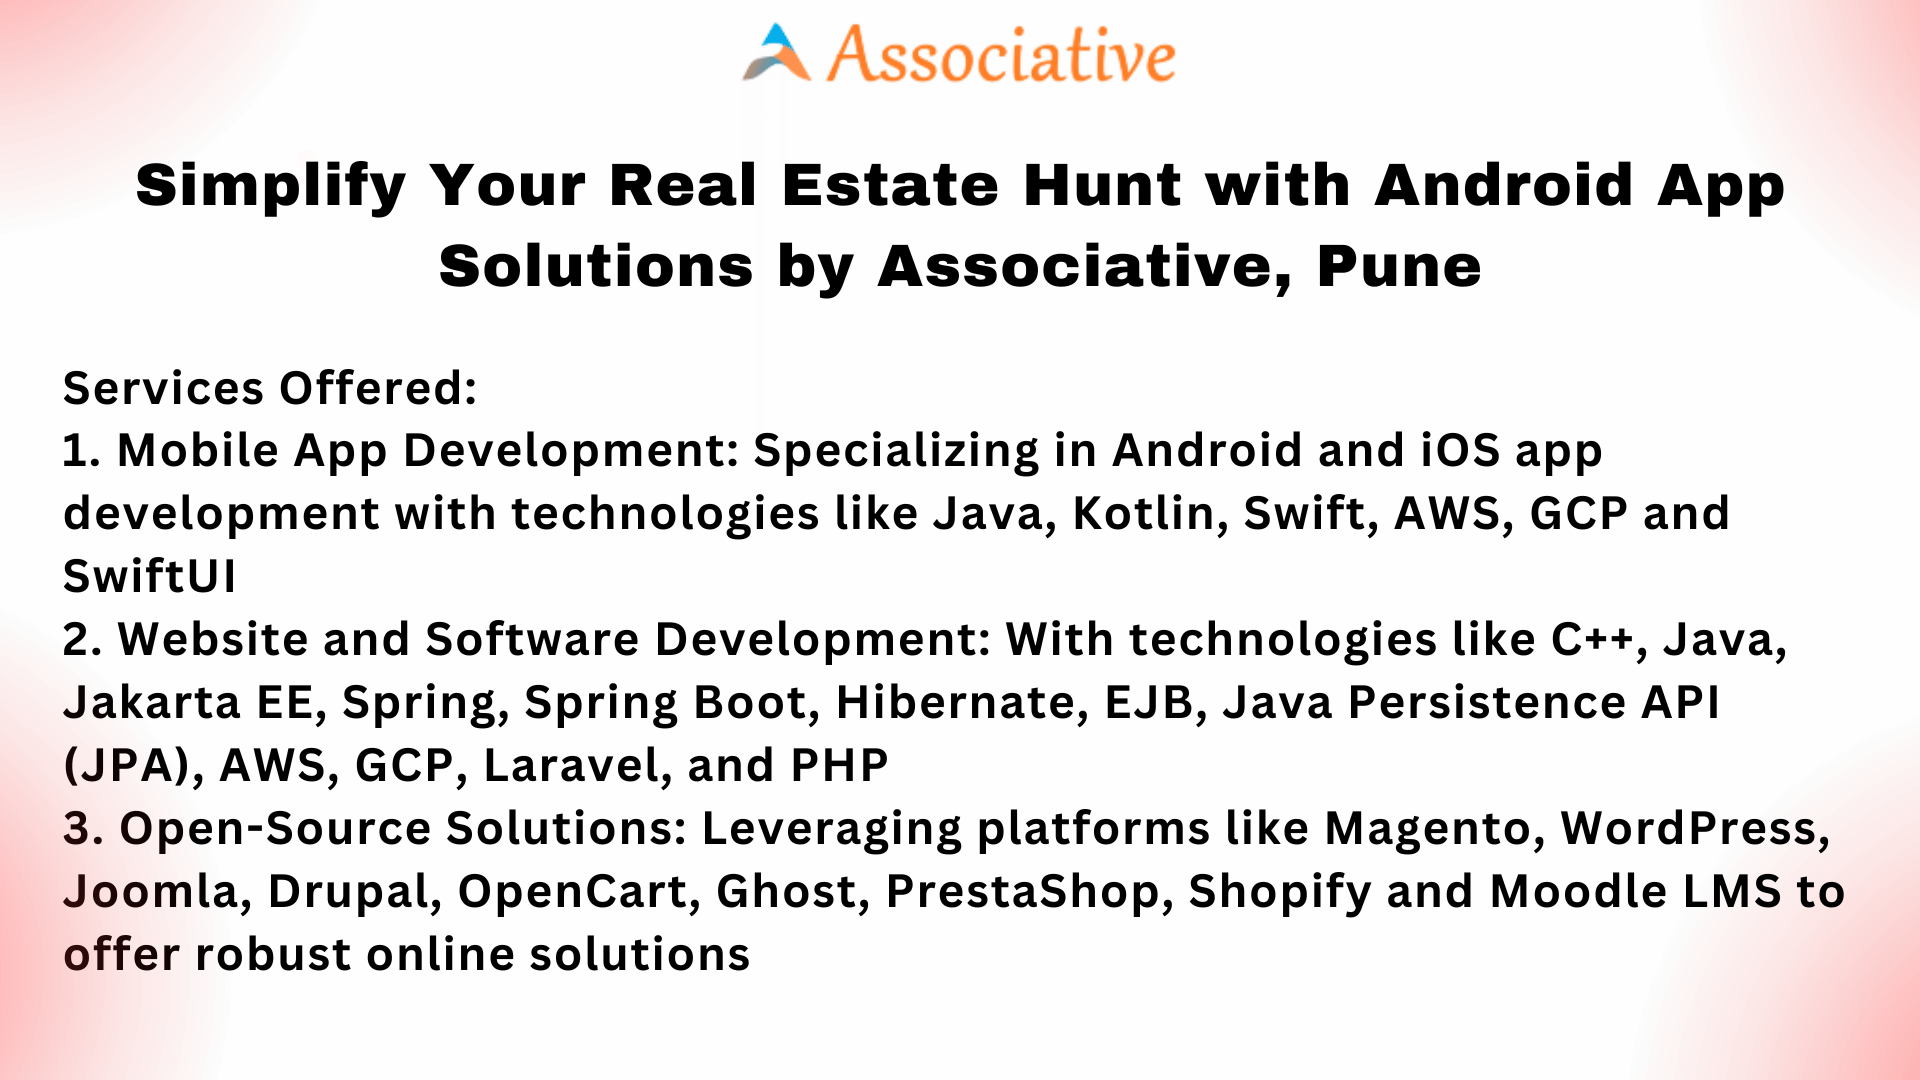 Simplify Your Real Estate Hunt with Android App Solutions by Associative, Pune